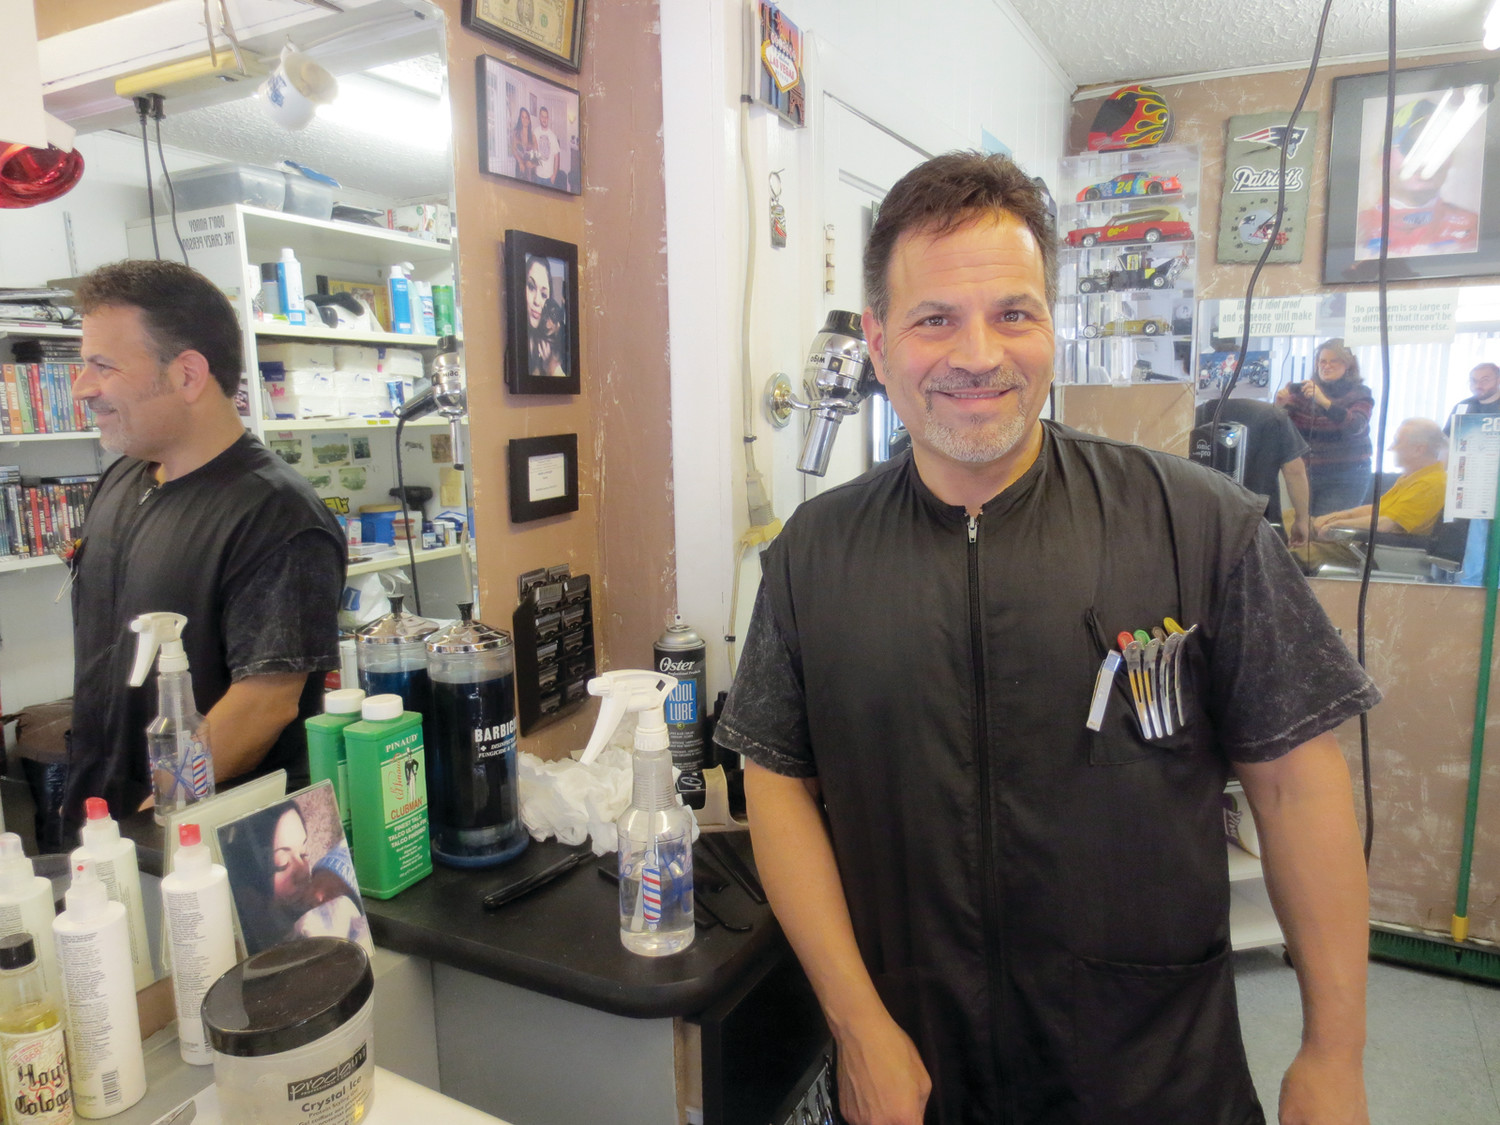 Dave Picozzi is seen here in front of his longtime barber shop on Post Road where he and his son Geno have been improving the looks of men and boys in Warwick for generations.  Come by for your fall haircut – walk-ins are always welcome!